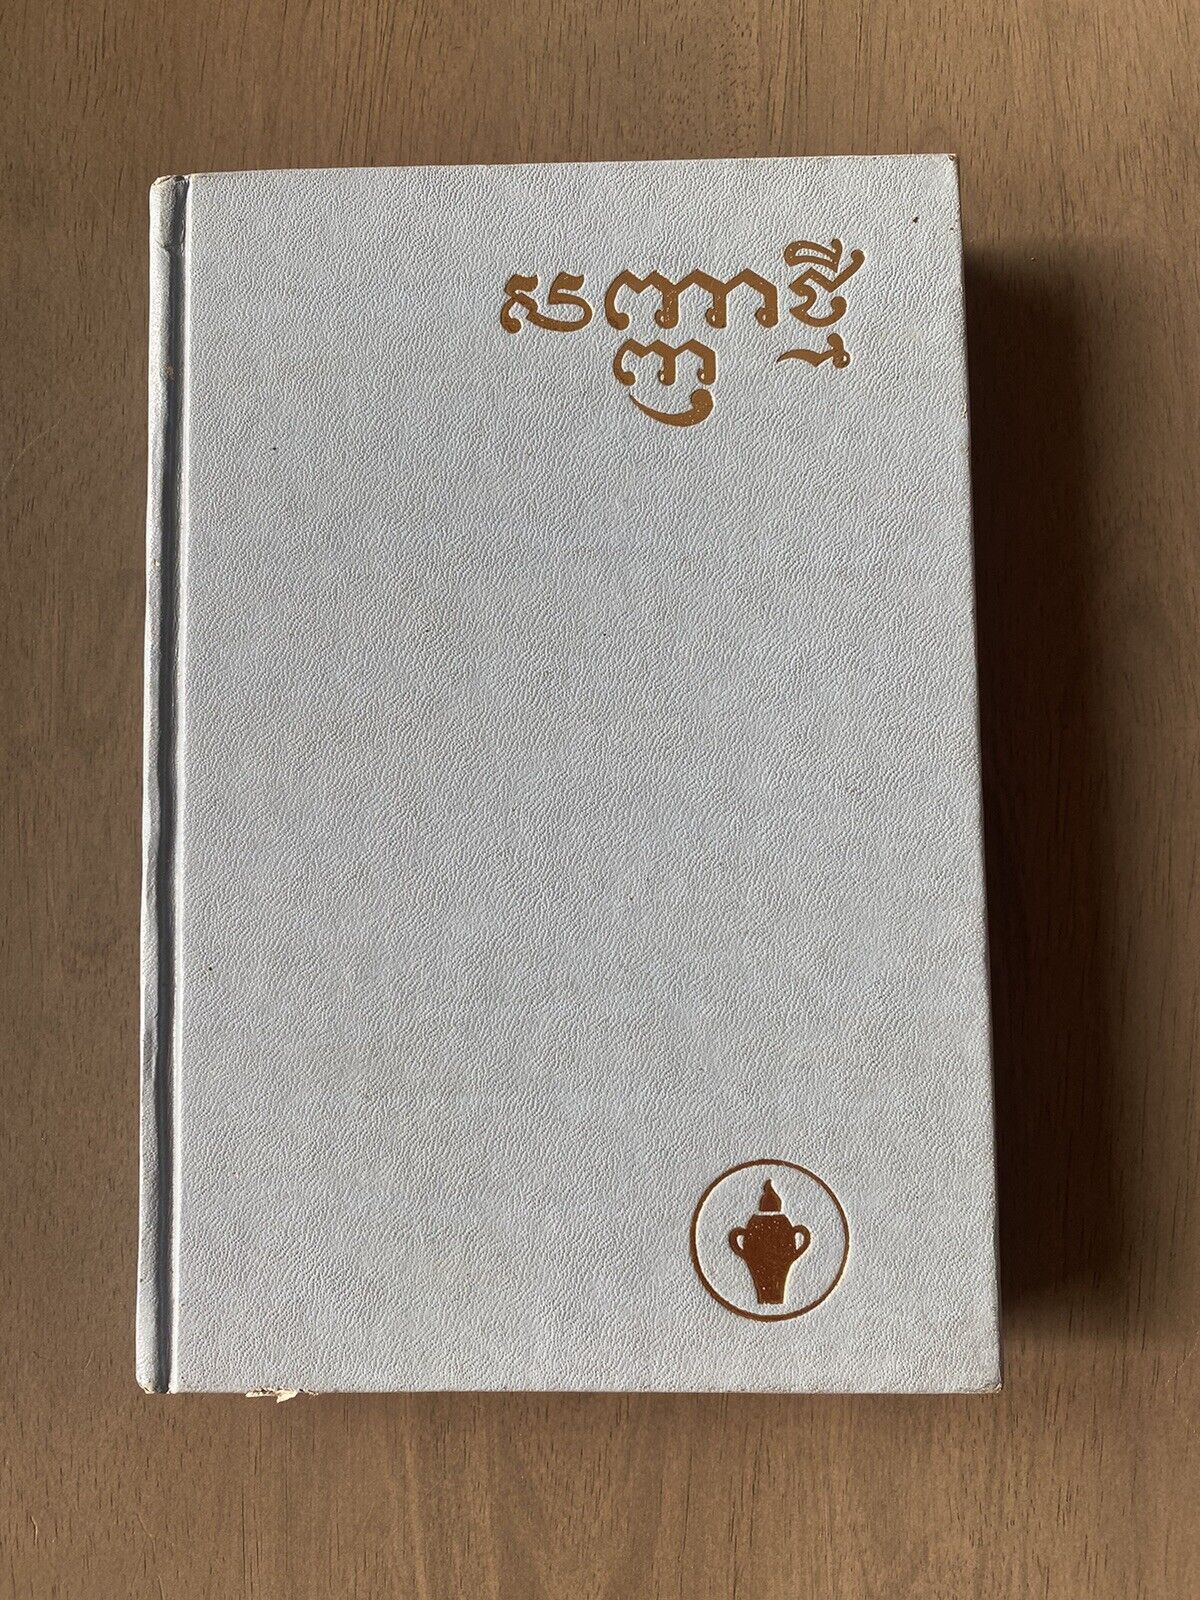 Vintage 1981 Cambodian Hard Cover New Testament in Khmer: VG